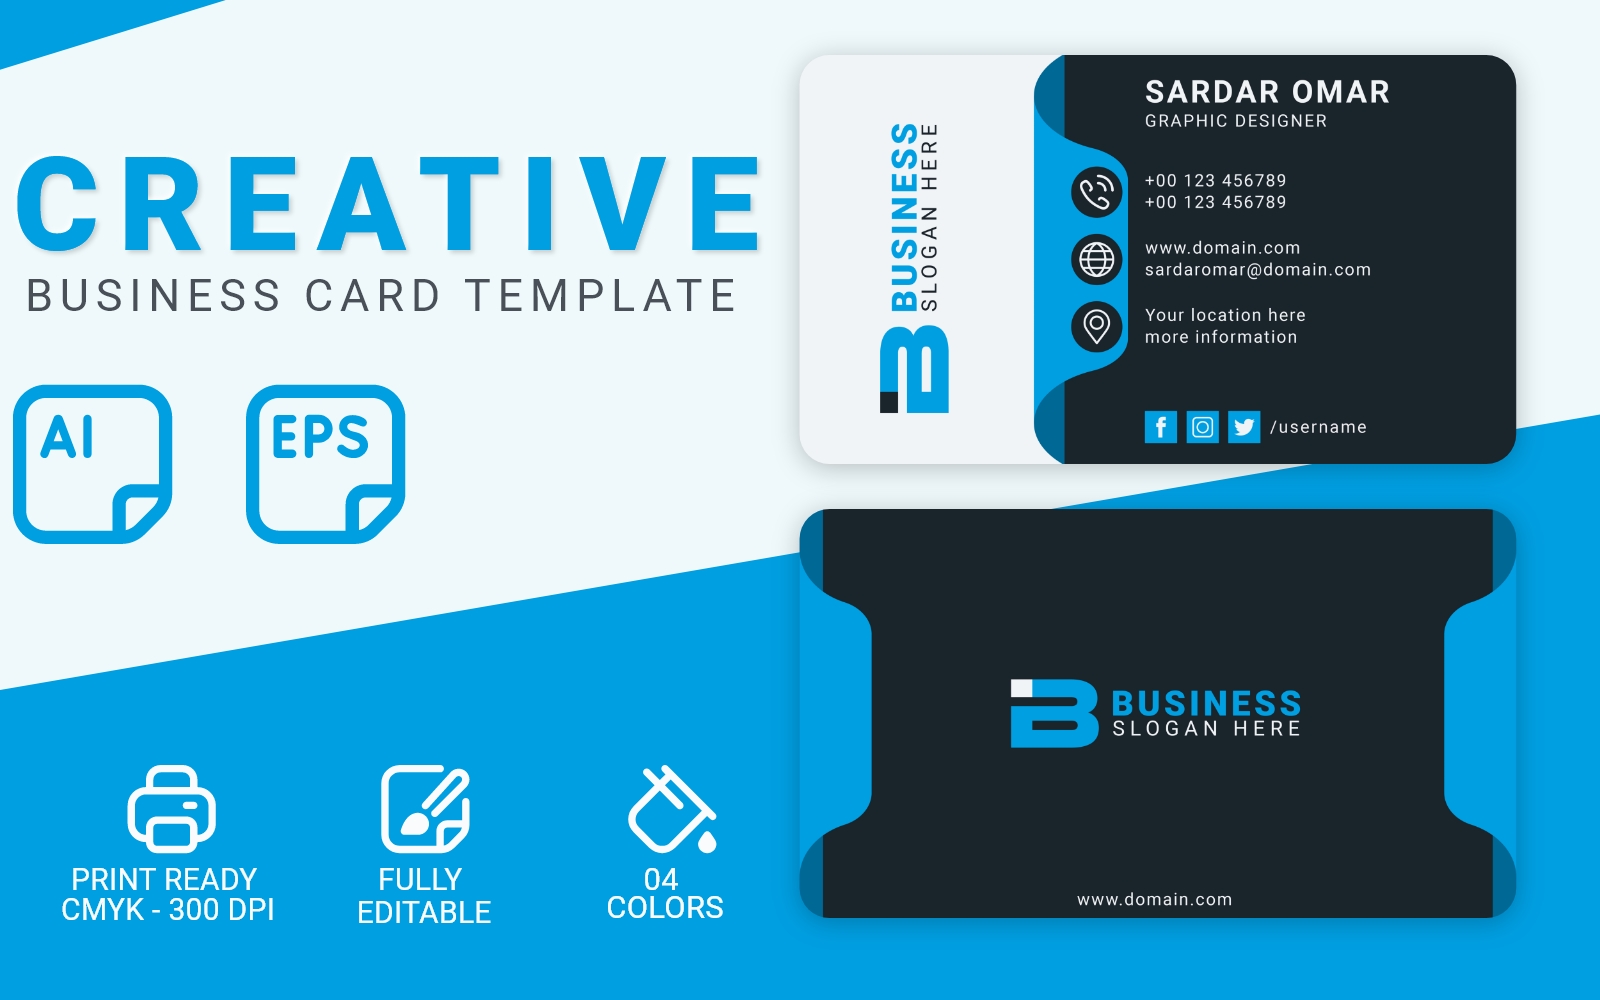 Realistic Business Card - Corporate Identity Template